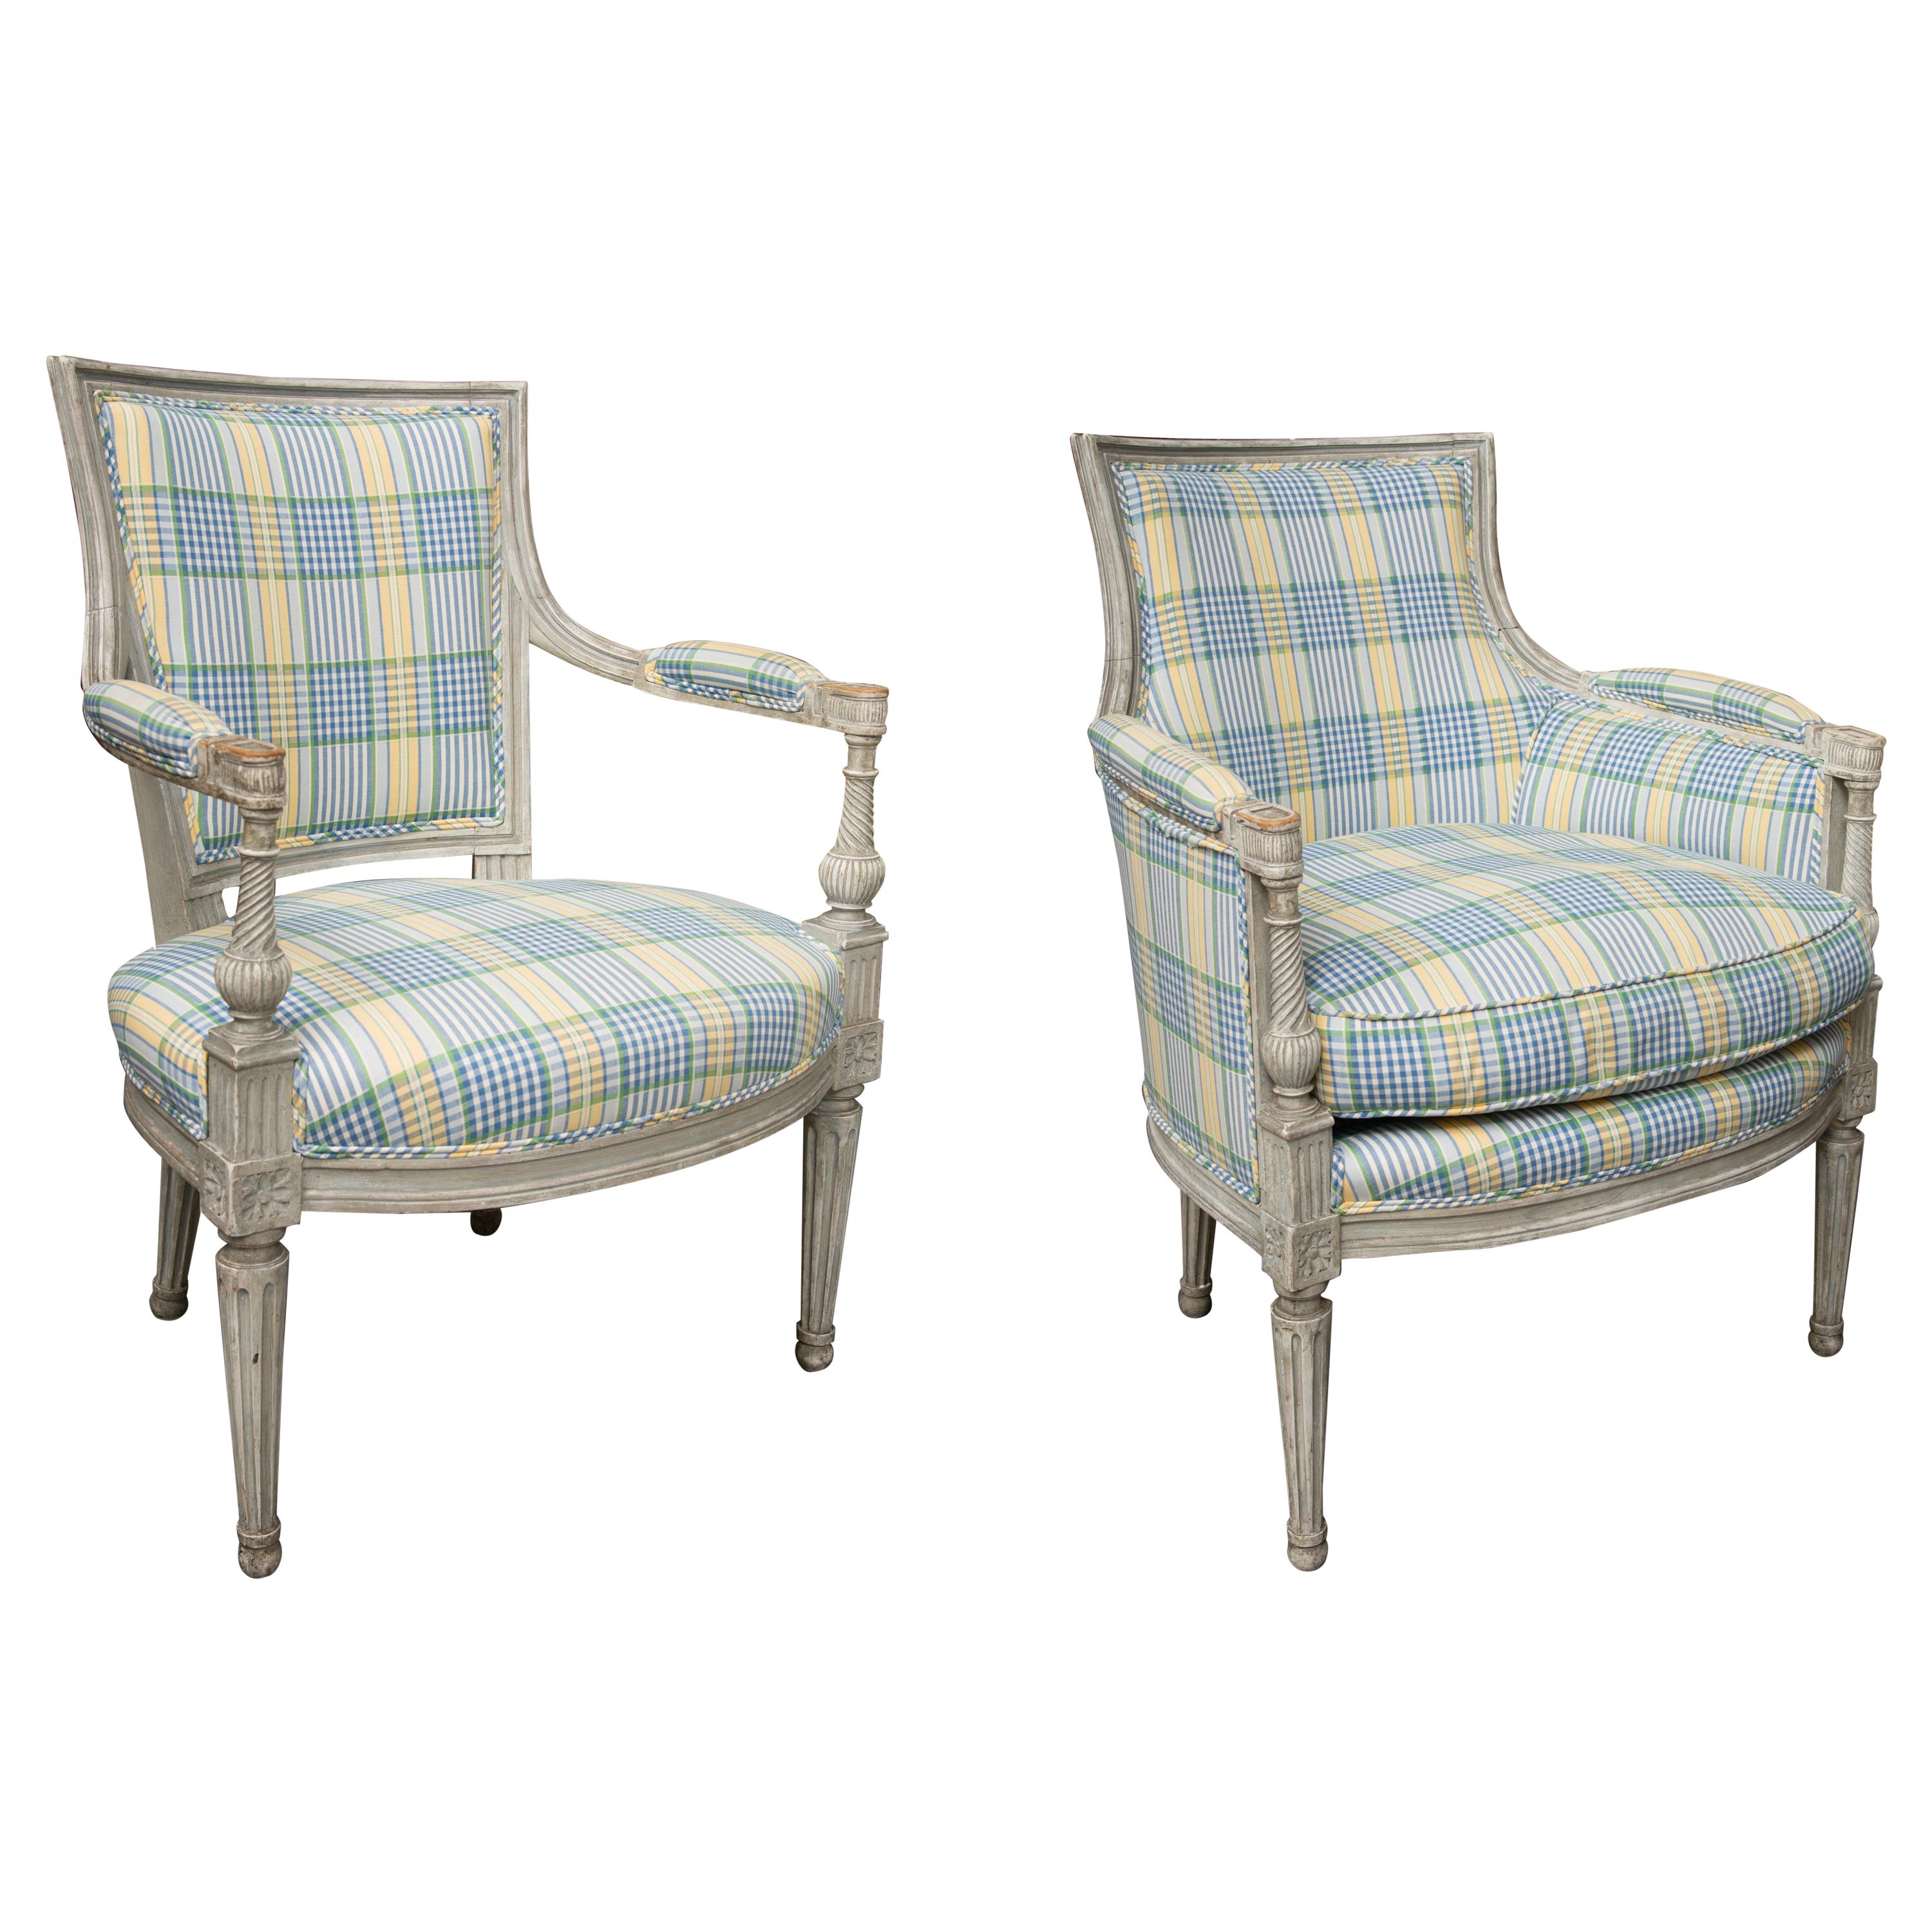 Pair of Companion Gray Painted Directoire Style Upholstered Chairs